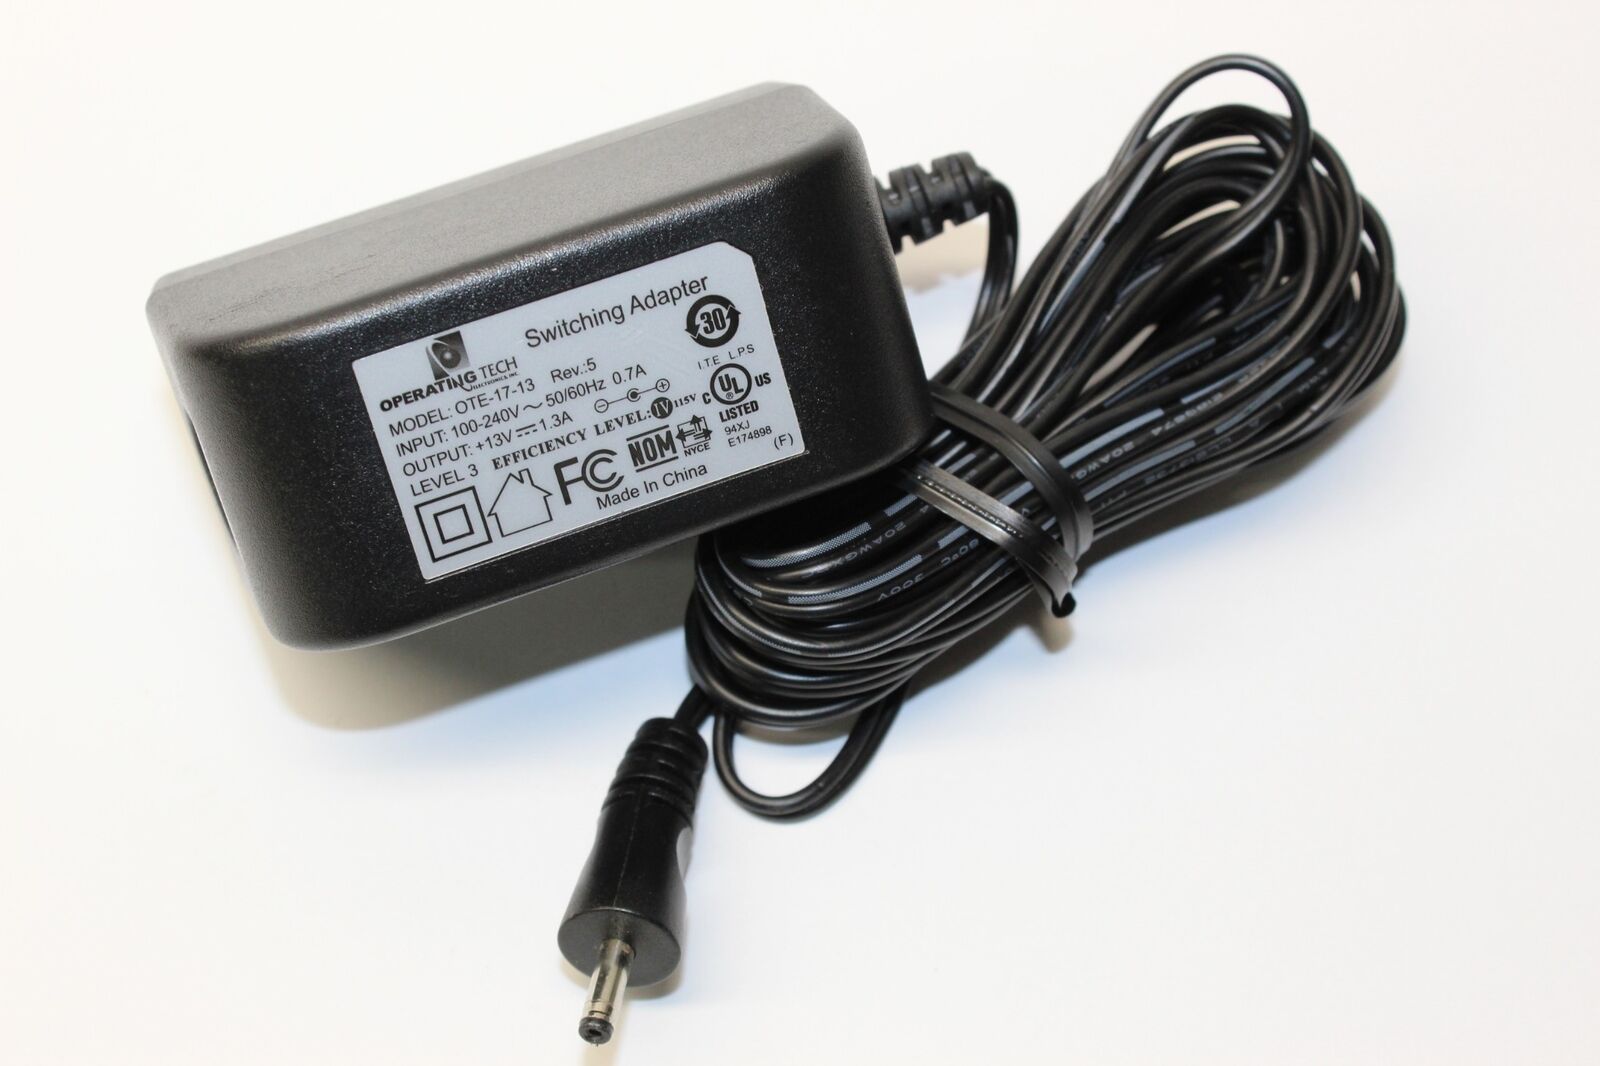 Operating Tech OTE-17-13 Switching Power Supply AC Adapter Output 13V DC 1.3A Brand: Operating Tech Type: Adapter